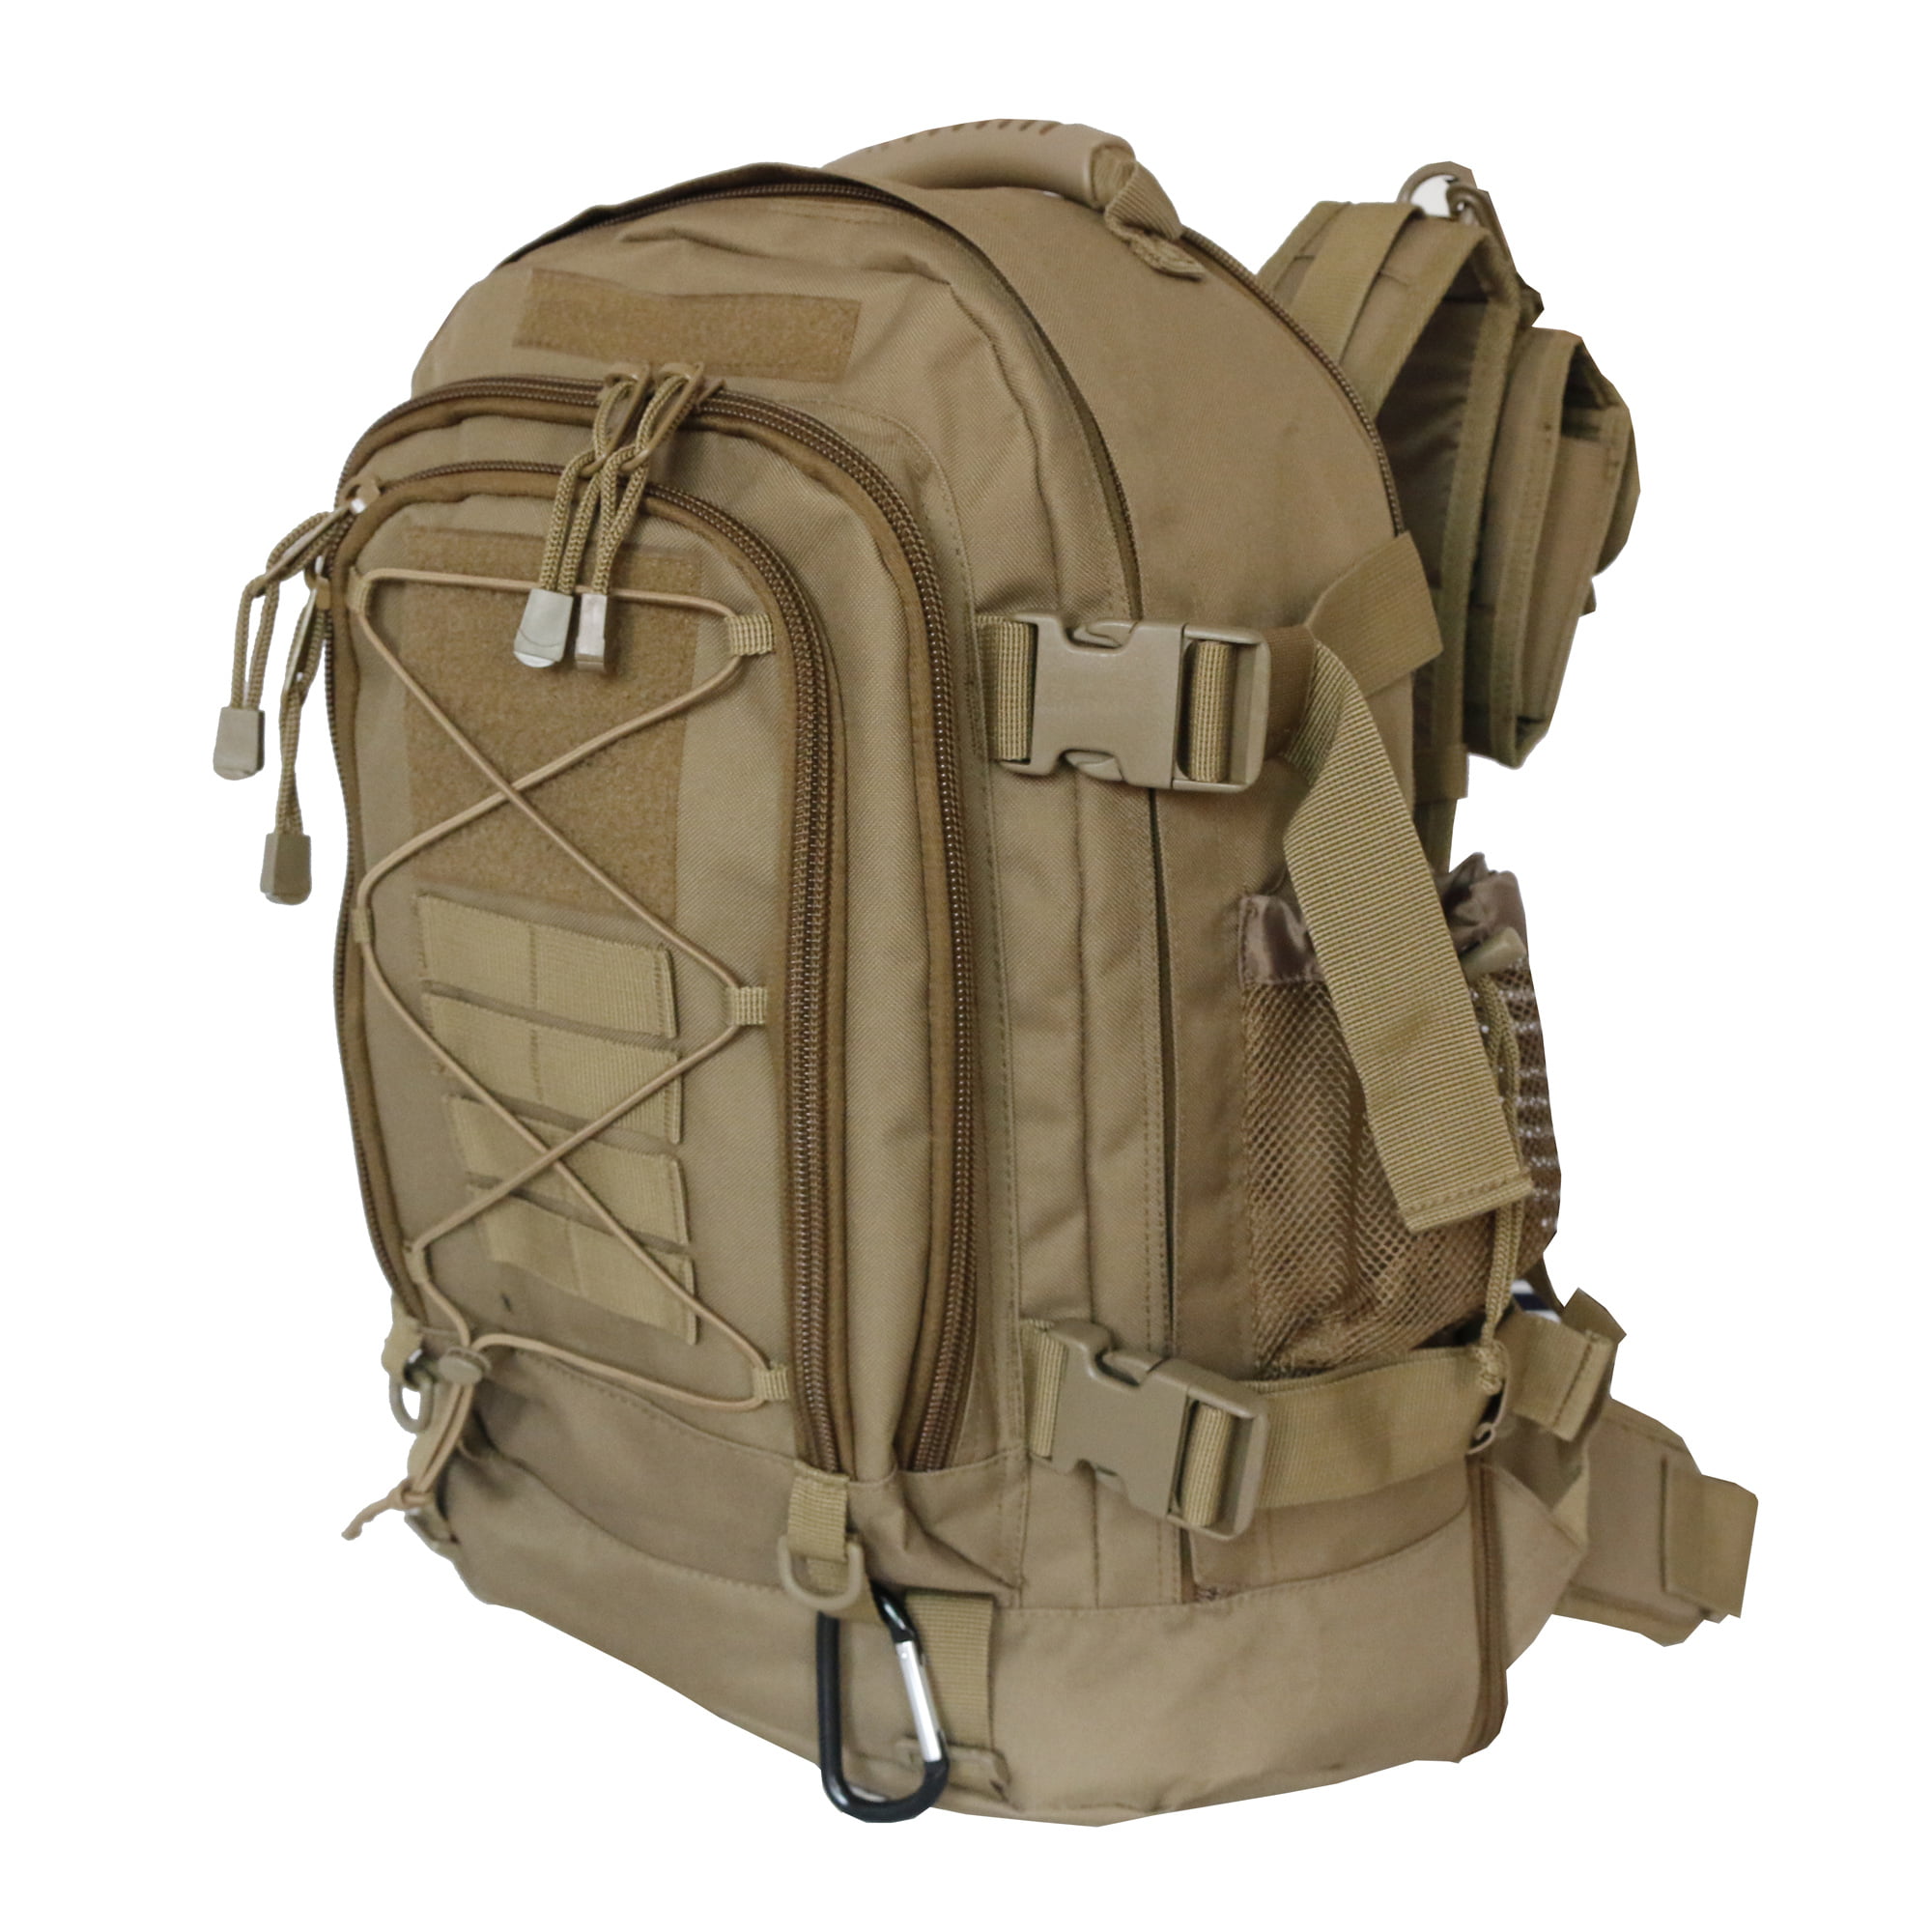 40L Outdoor Expandable Tactical Backpack Military Sport Camping Hiking Trekking 